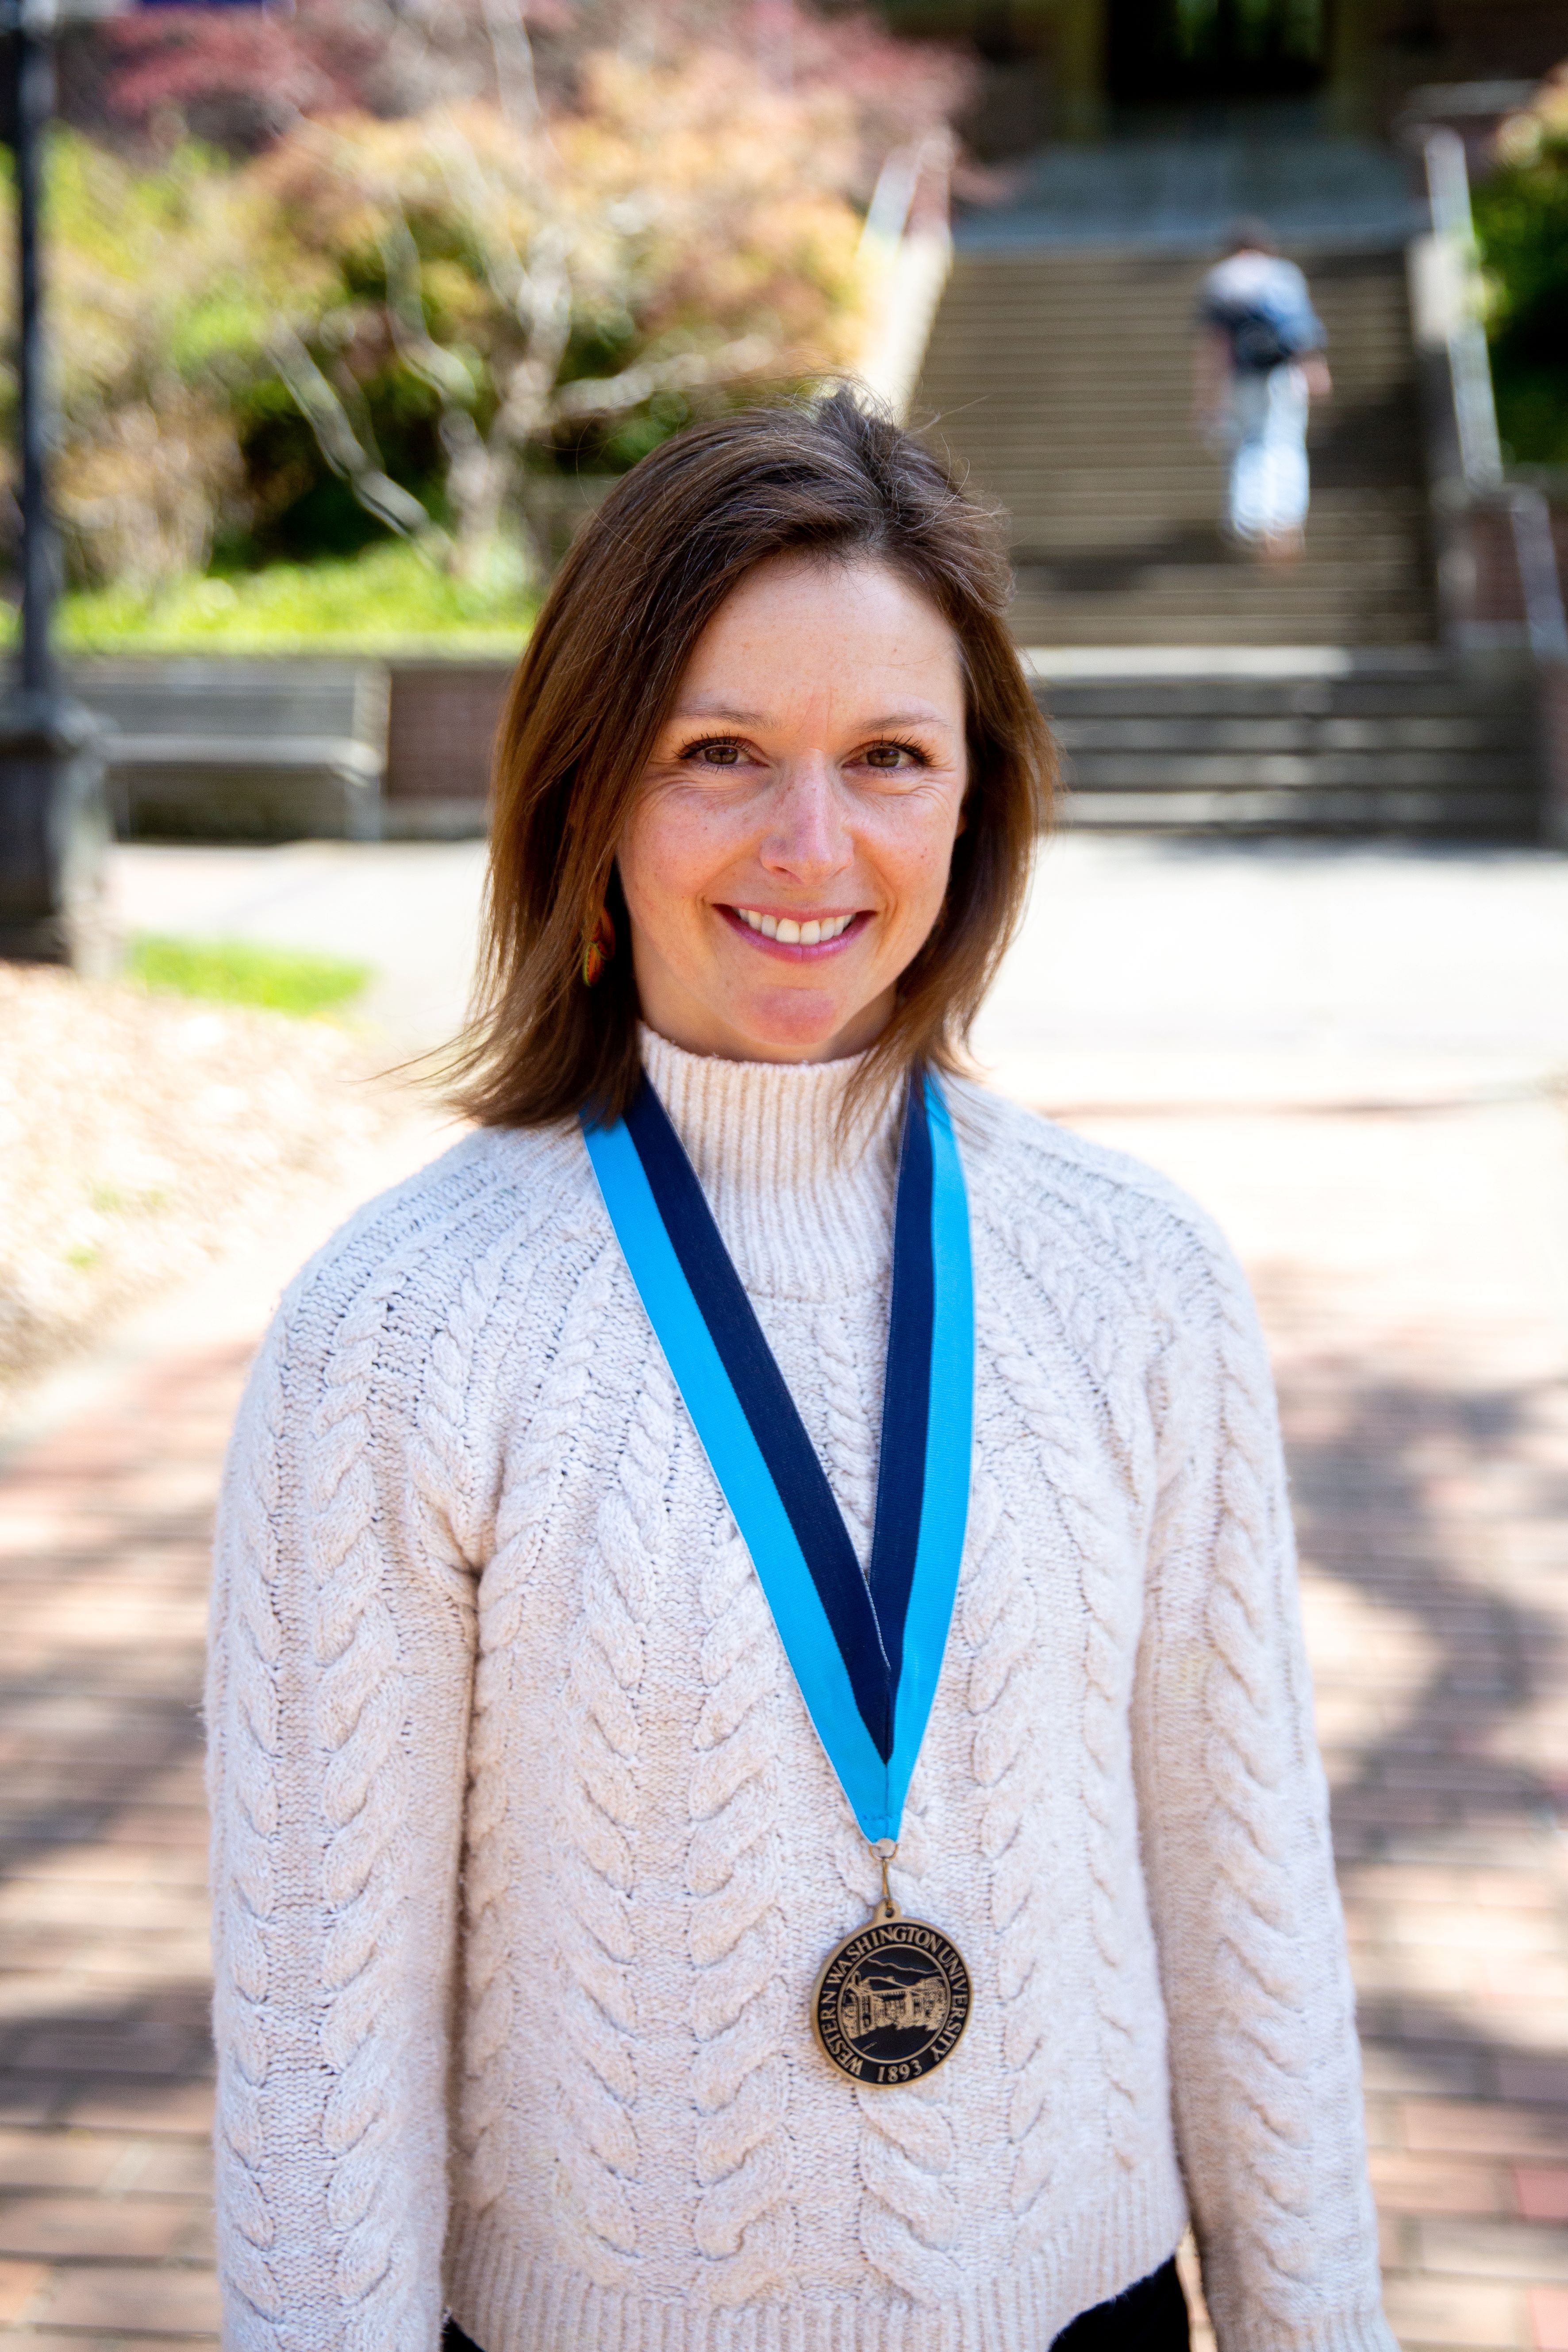 Kate Stevenson in a white cable knit sweater standing in front of Old Main with a WWU award medallion on a neck ribbon